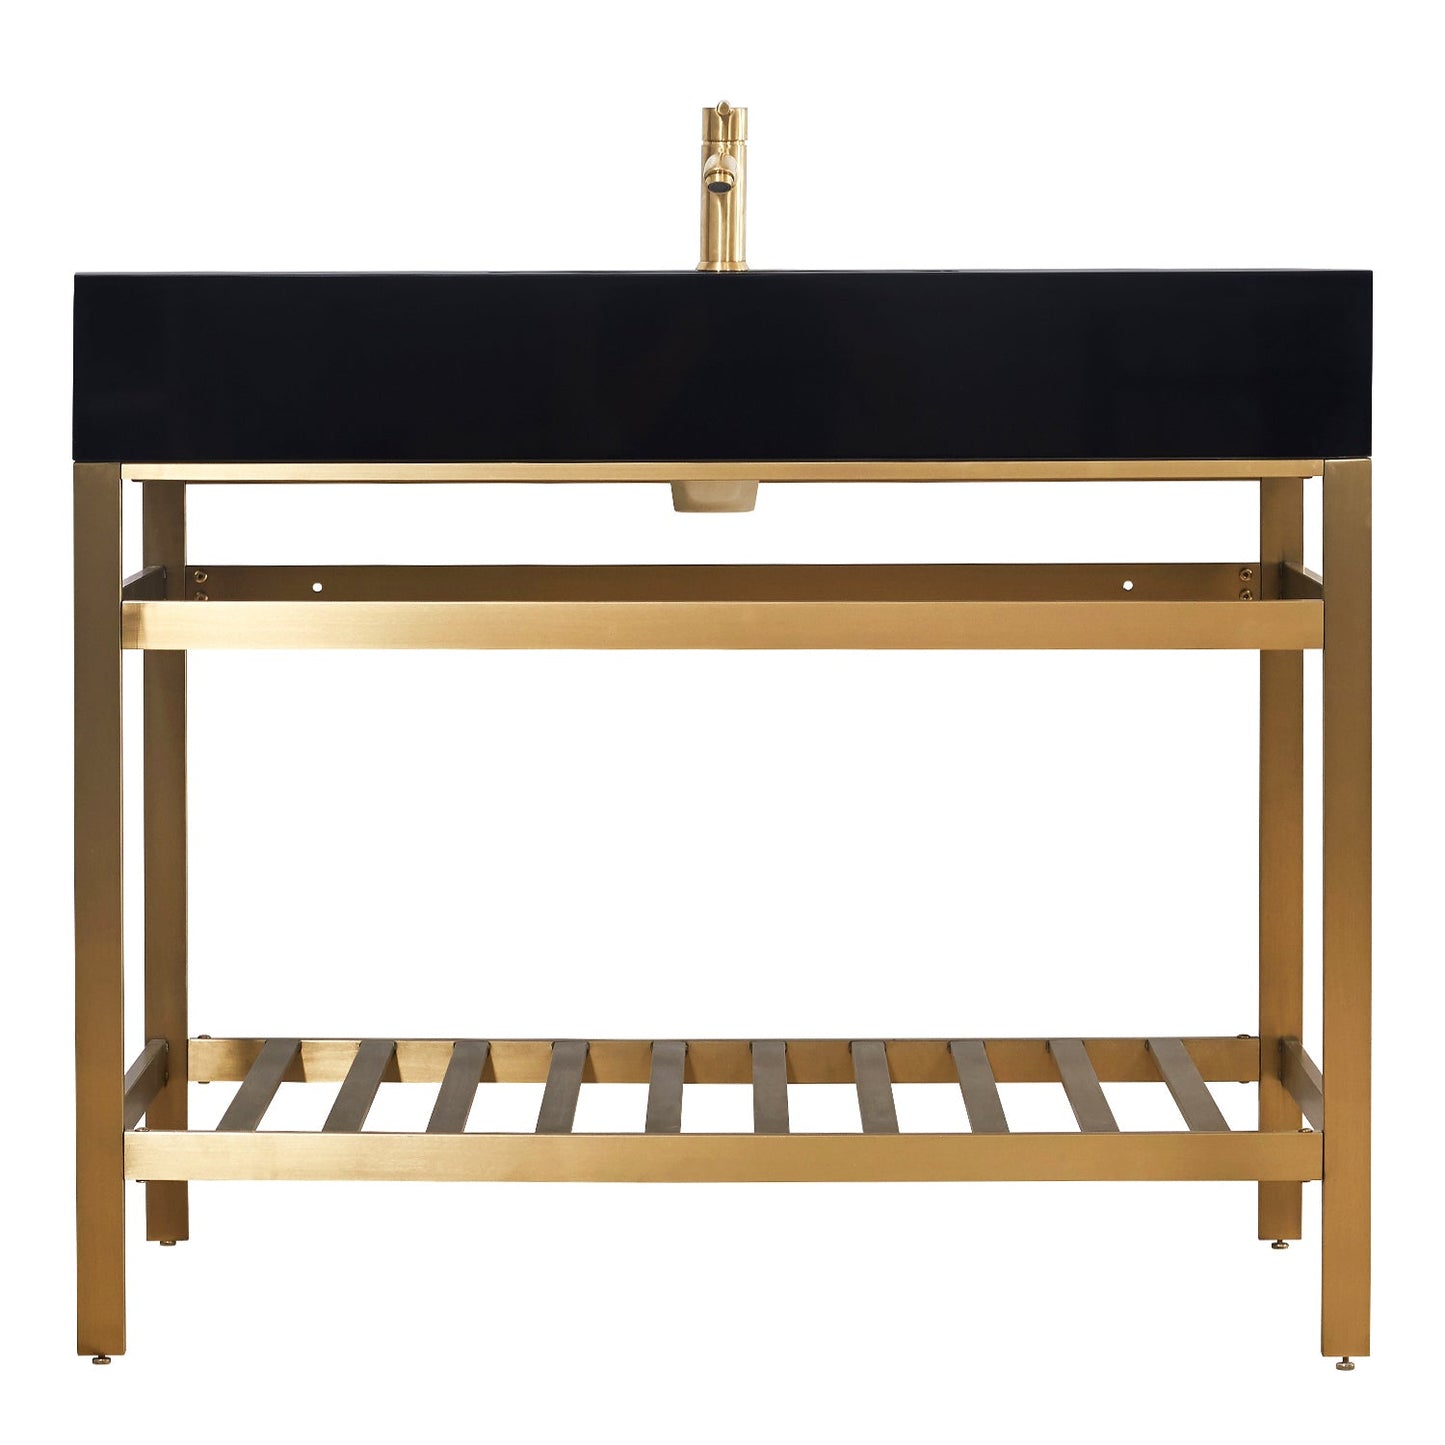 Nauders 42" Single Stainless Steel Vanity Console in Brushed Gold with Imperial Black Stone Countertop without Mirror